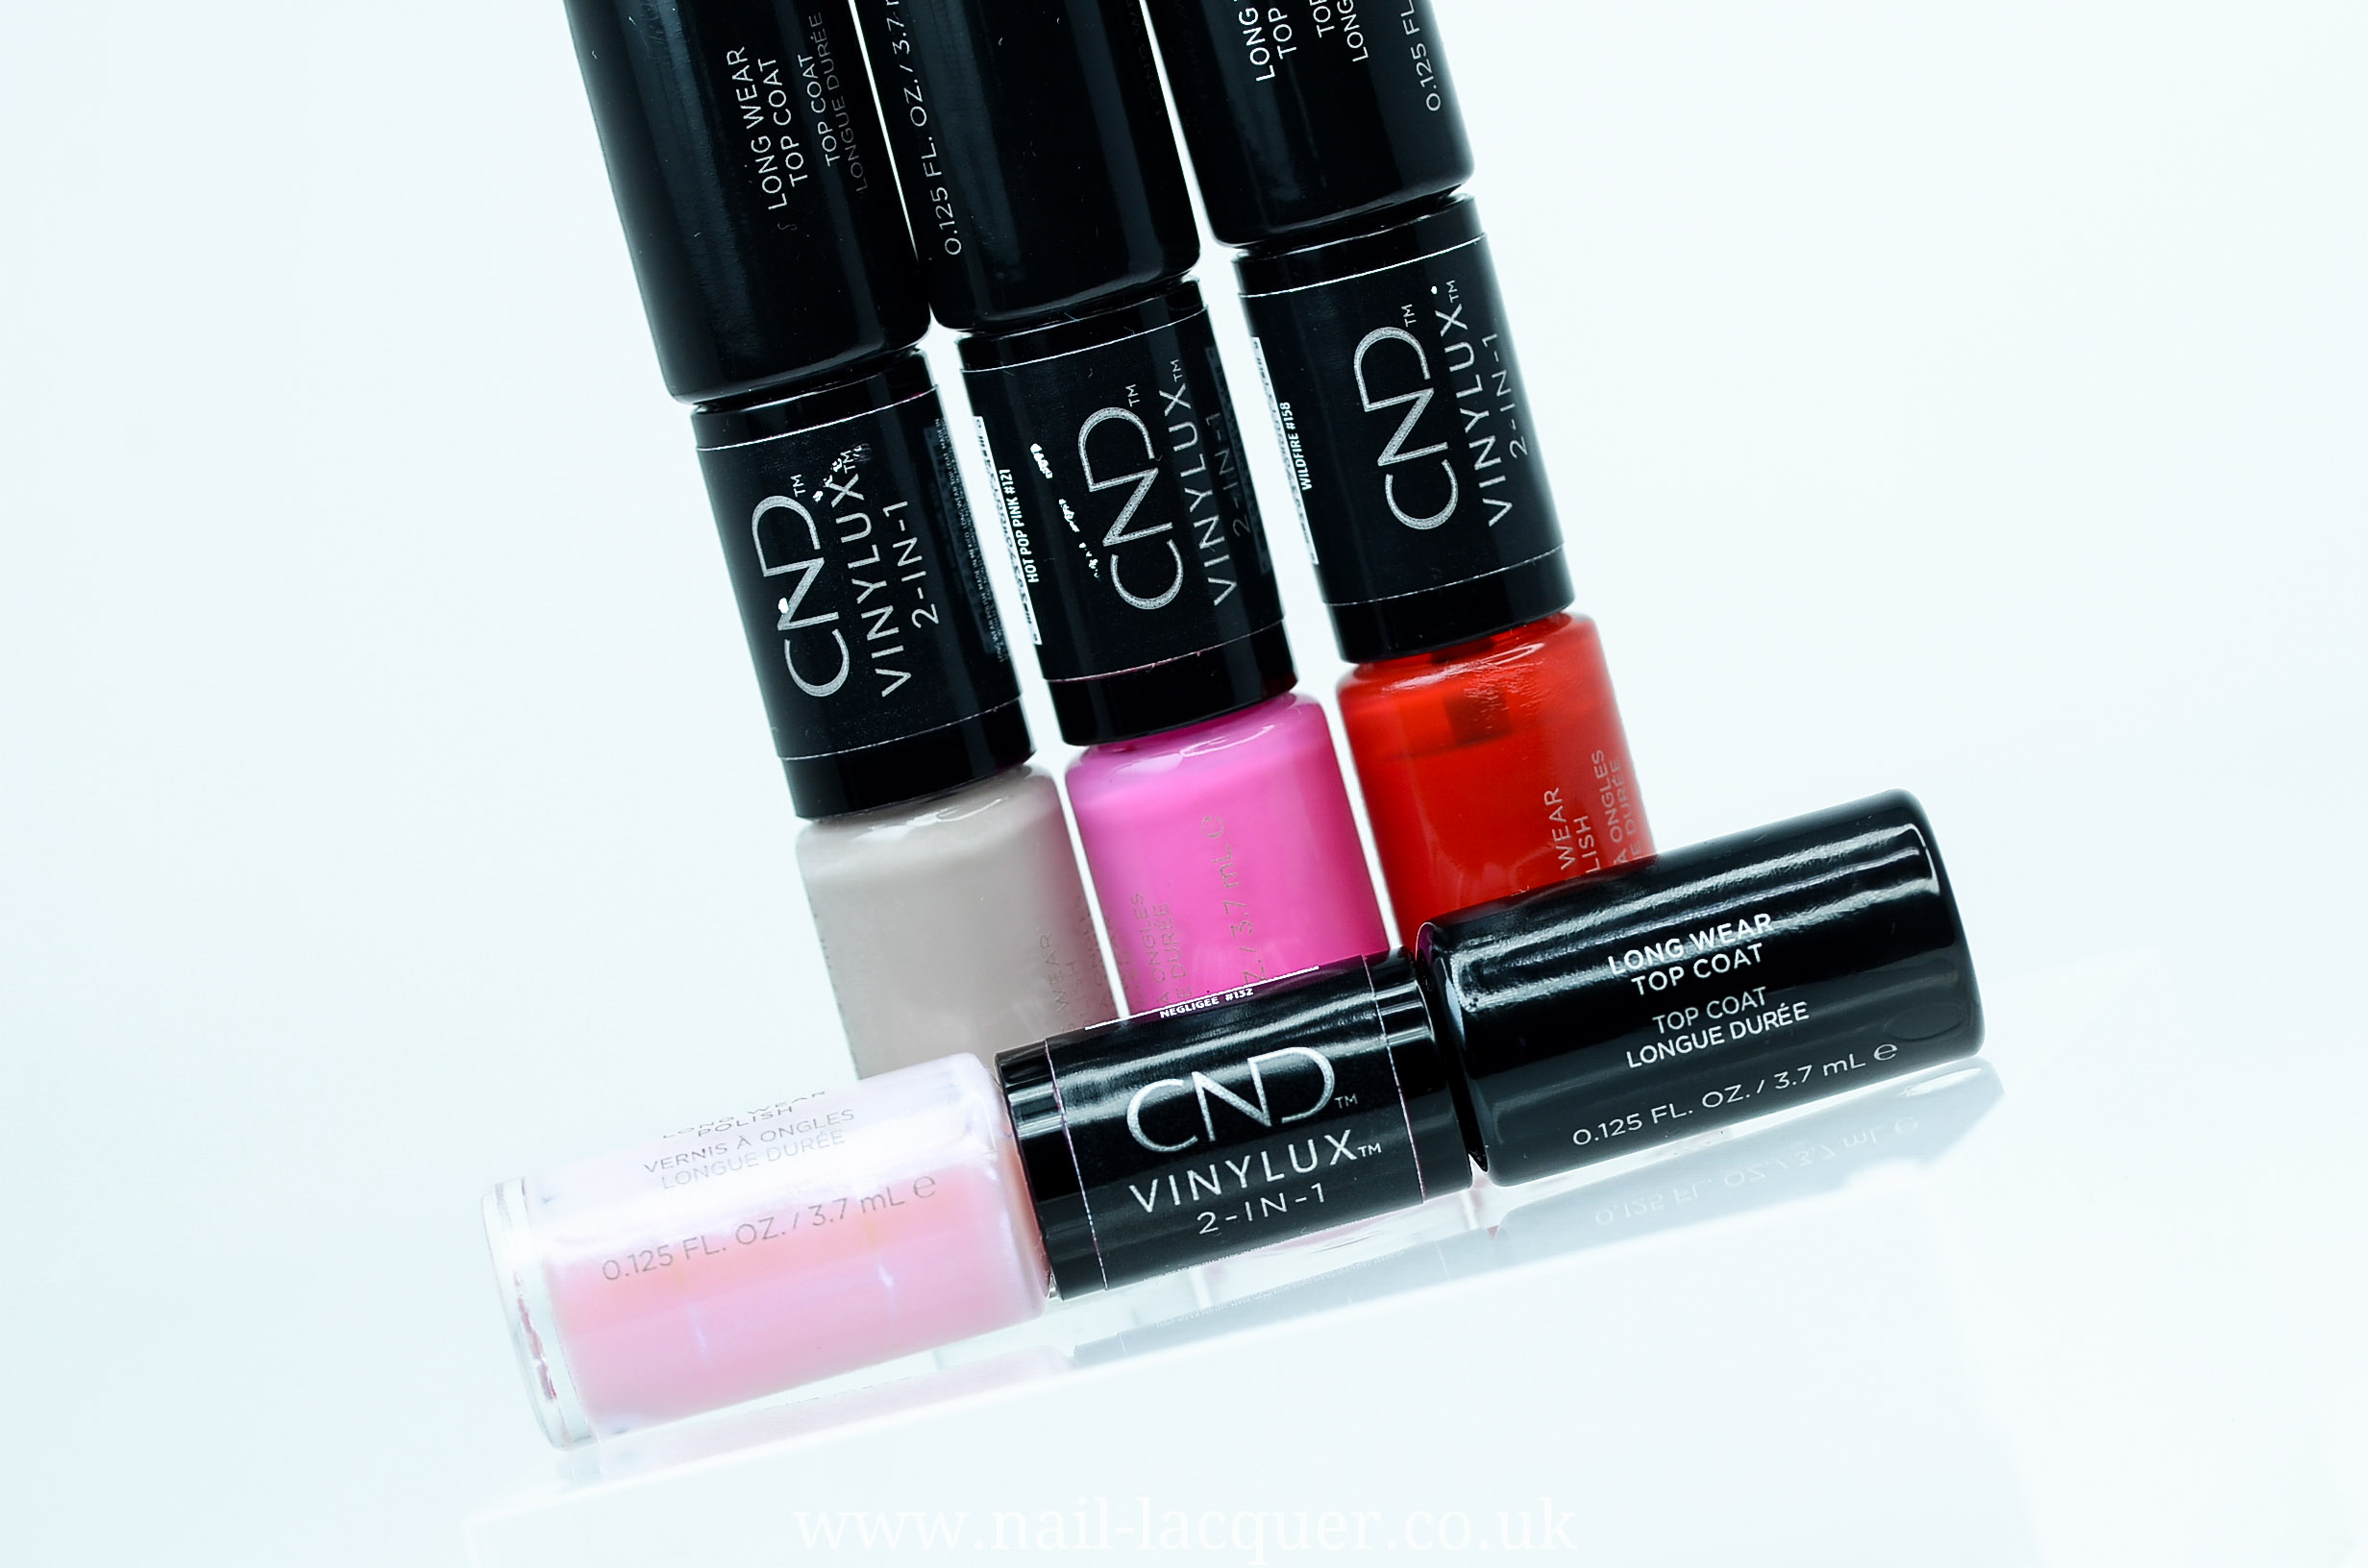 1. CND Vinylux Long Wear Nail Polish in "New Wave" - wide 5